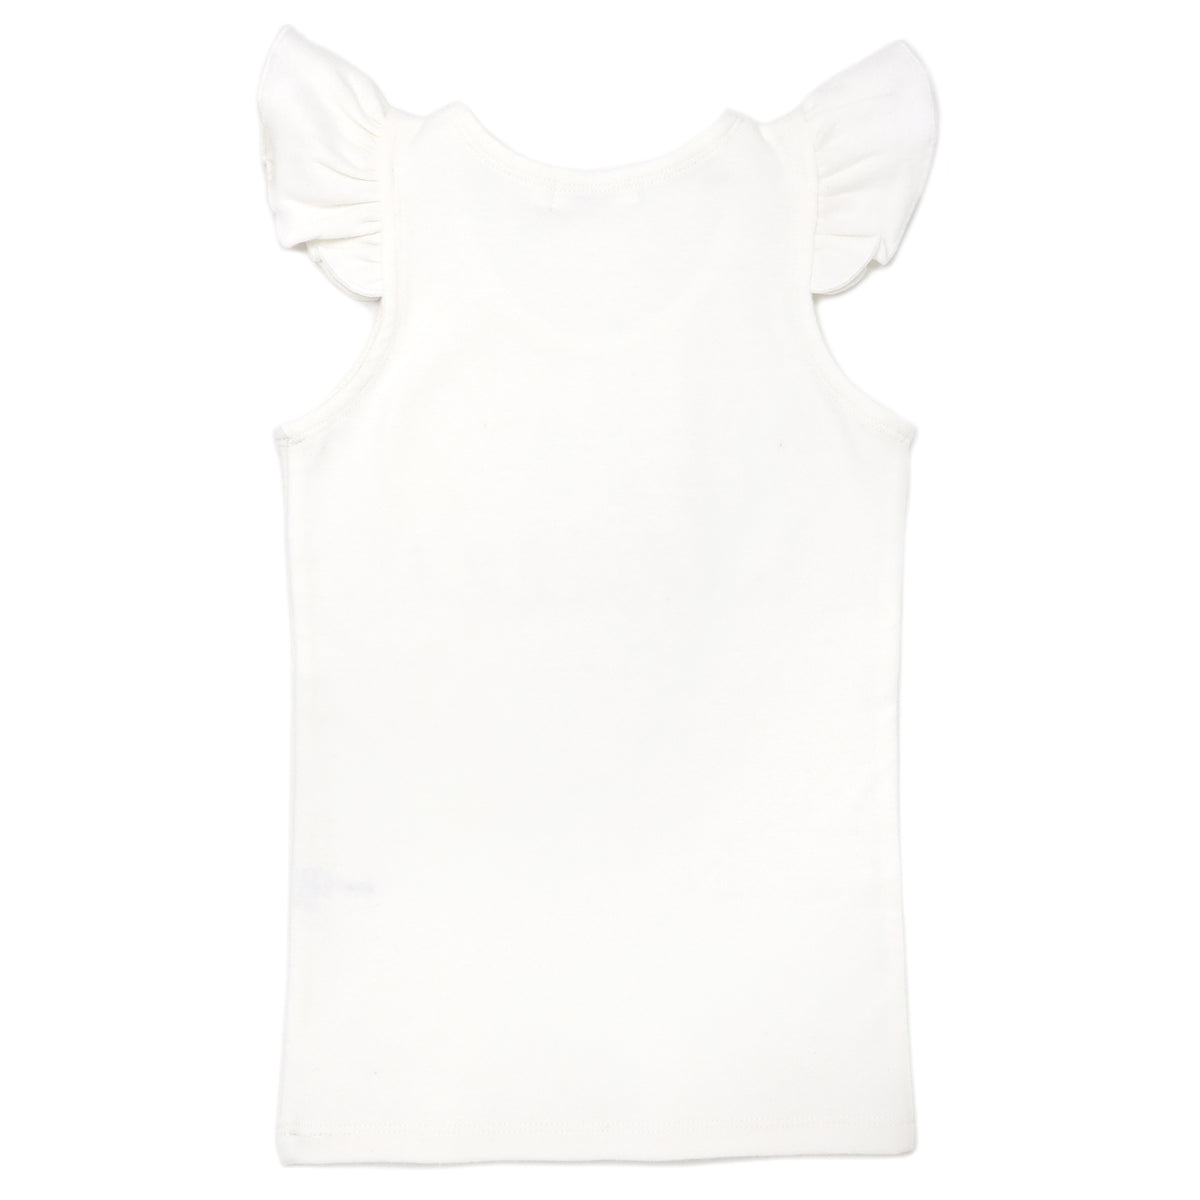 "lil sis" Pink Embroidered Cotton Baby Rib FS Tank